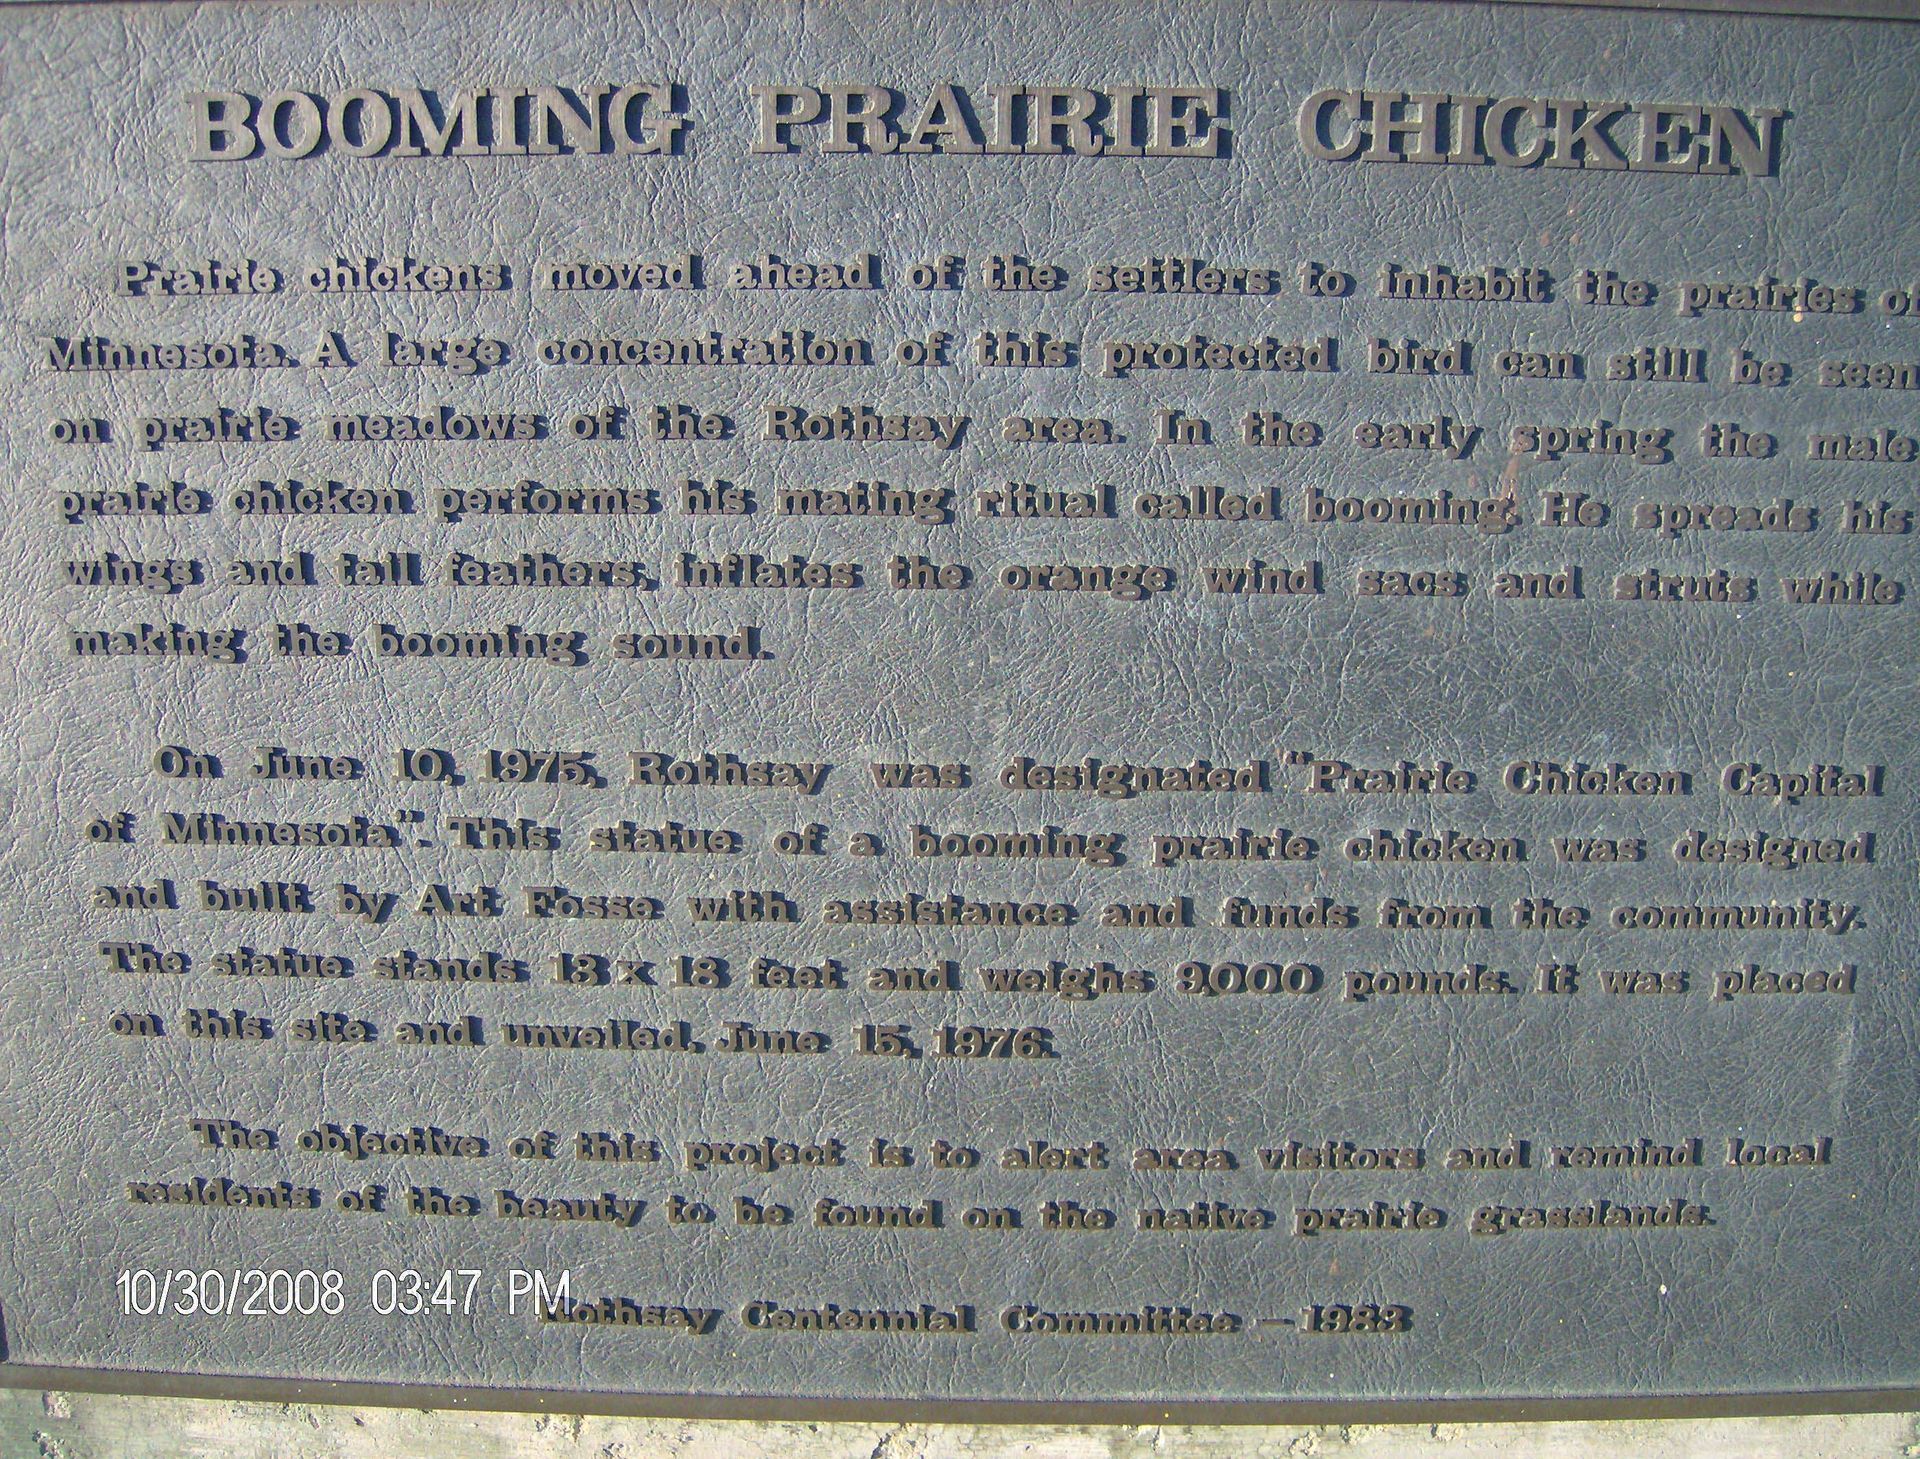 World's Largest Booming Prairie Chicken Sculpture, world record in Rothsay, Minnesota